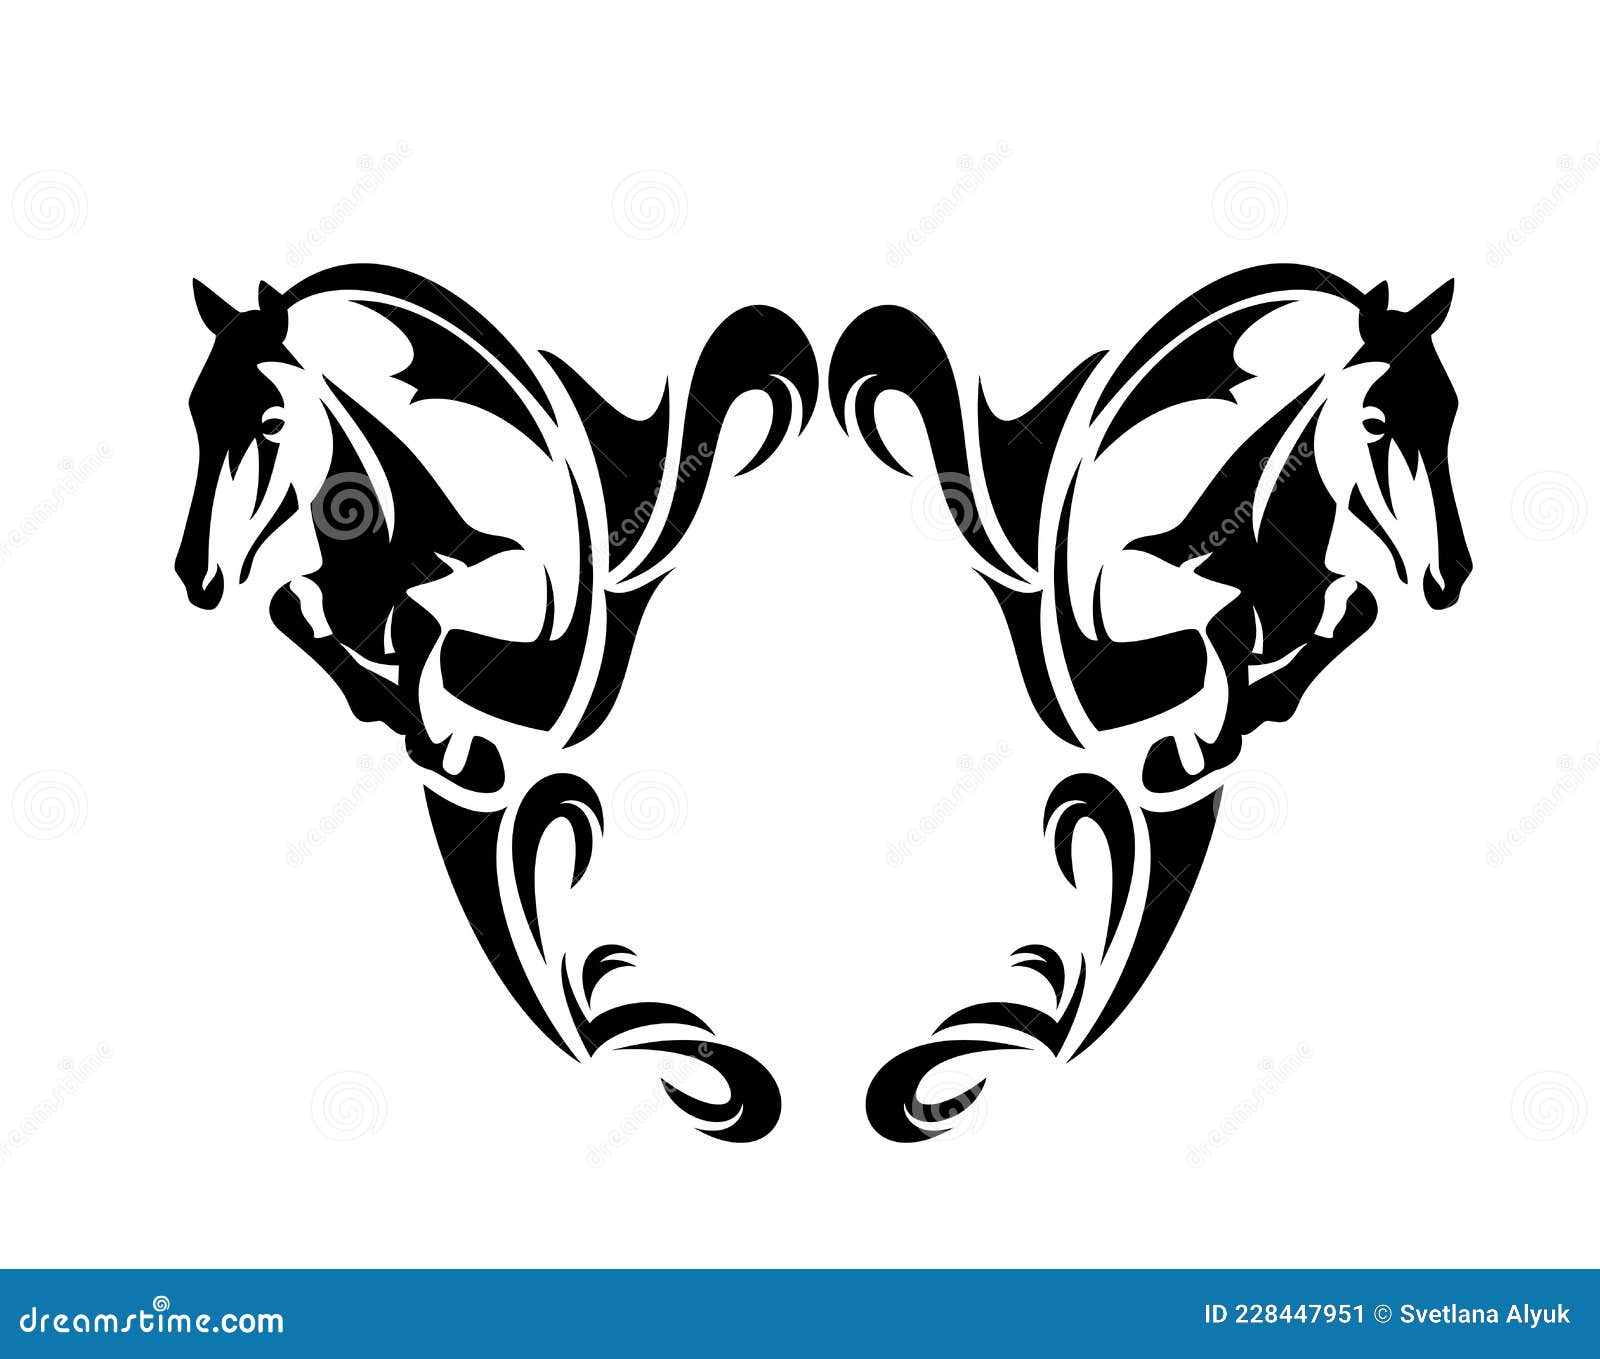 Jumping Horses and Heraldic Coat of Arms Template Black and White ...